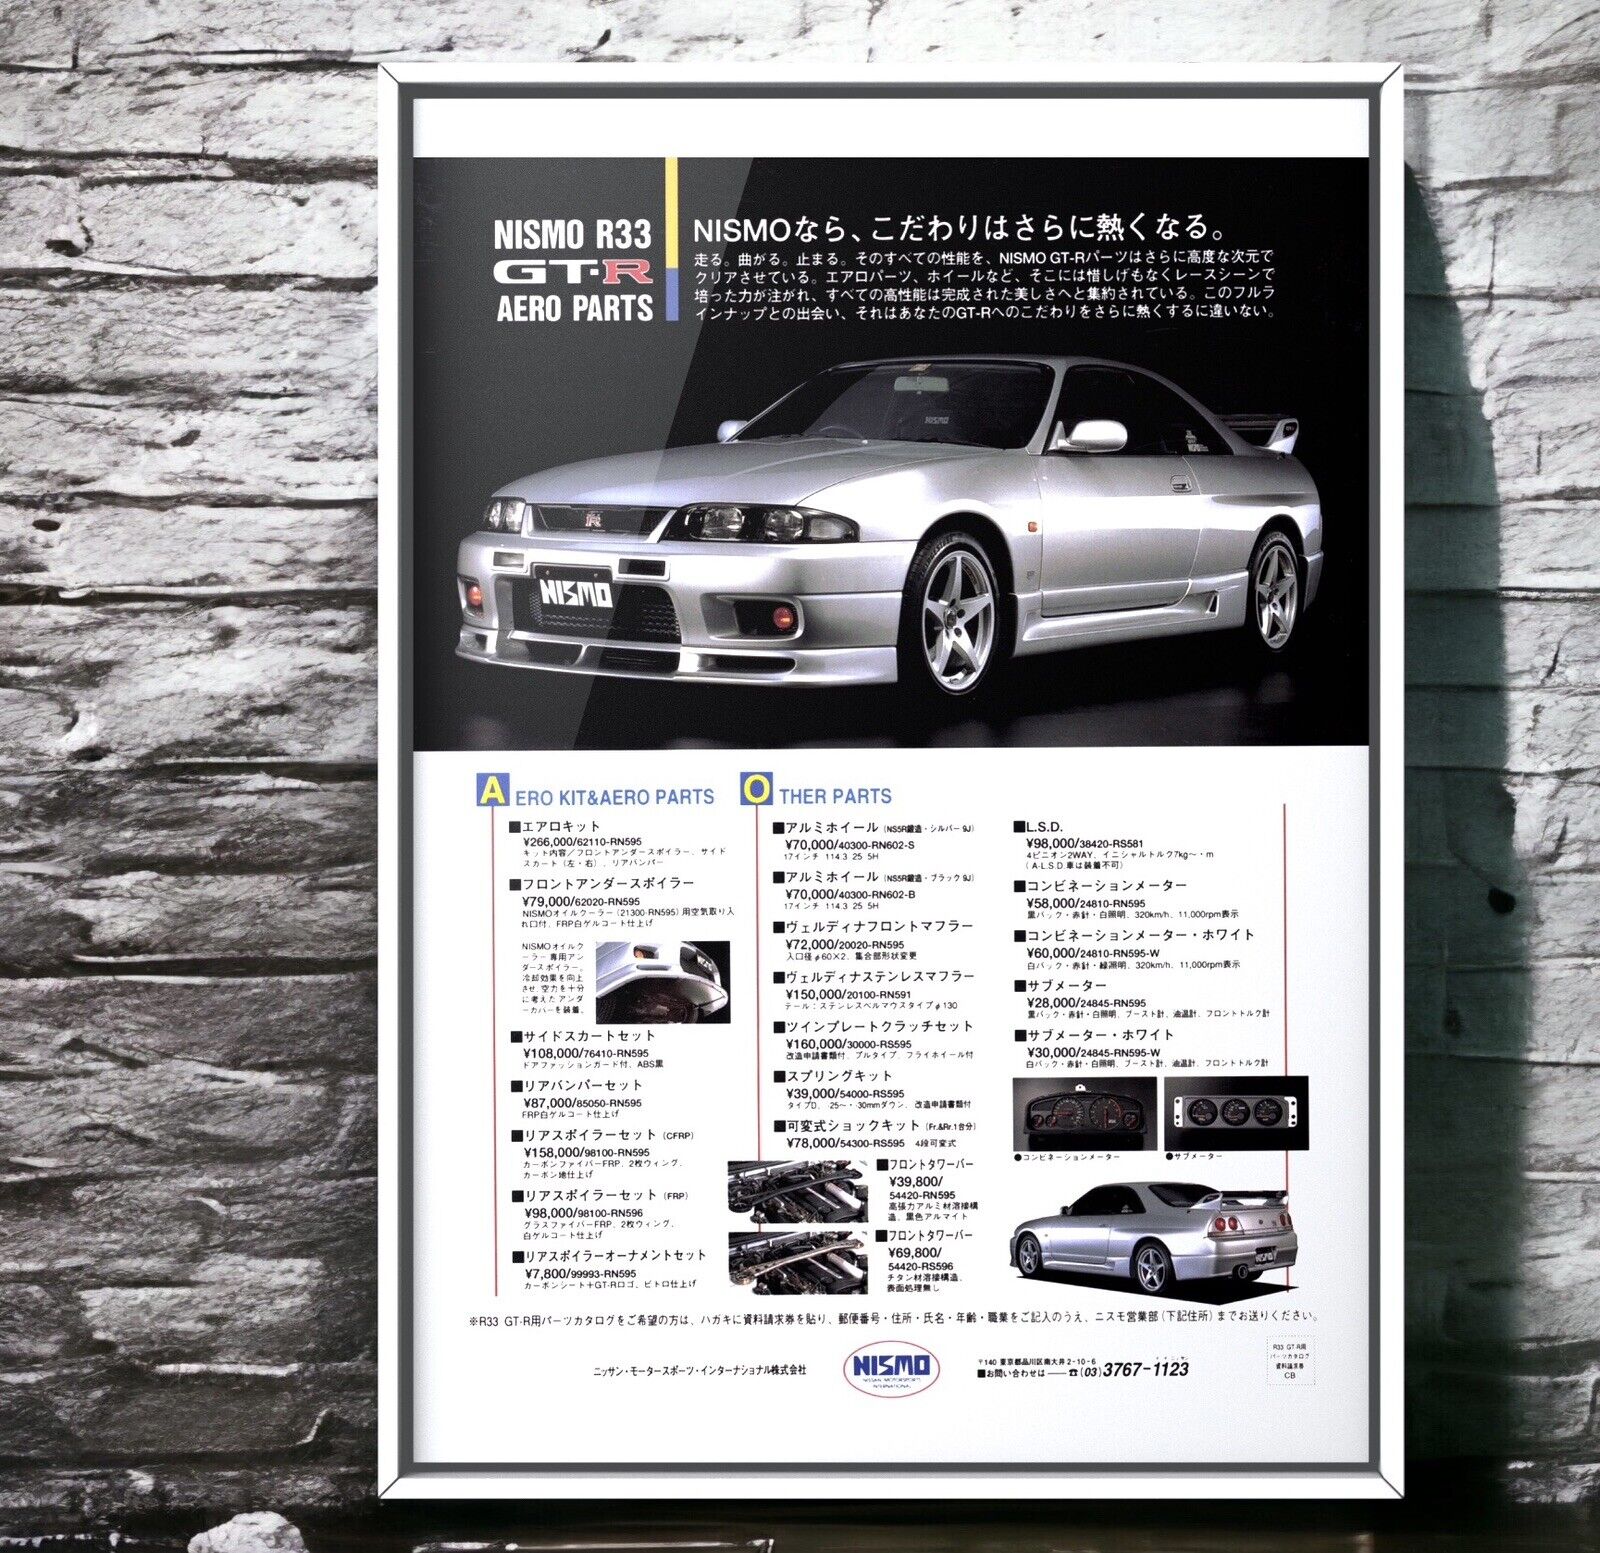 90's NISMO Authentic Official Vintage NISSAN R33 Skyline GT-R Ad Poster, Parts r